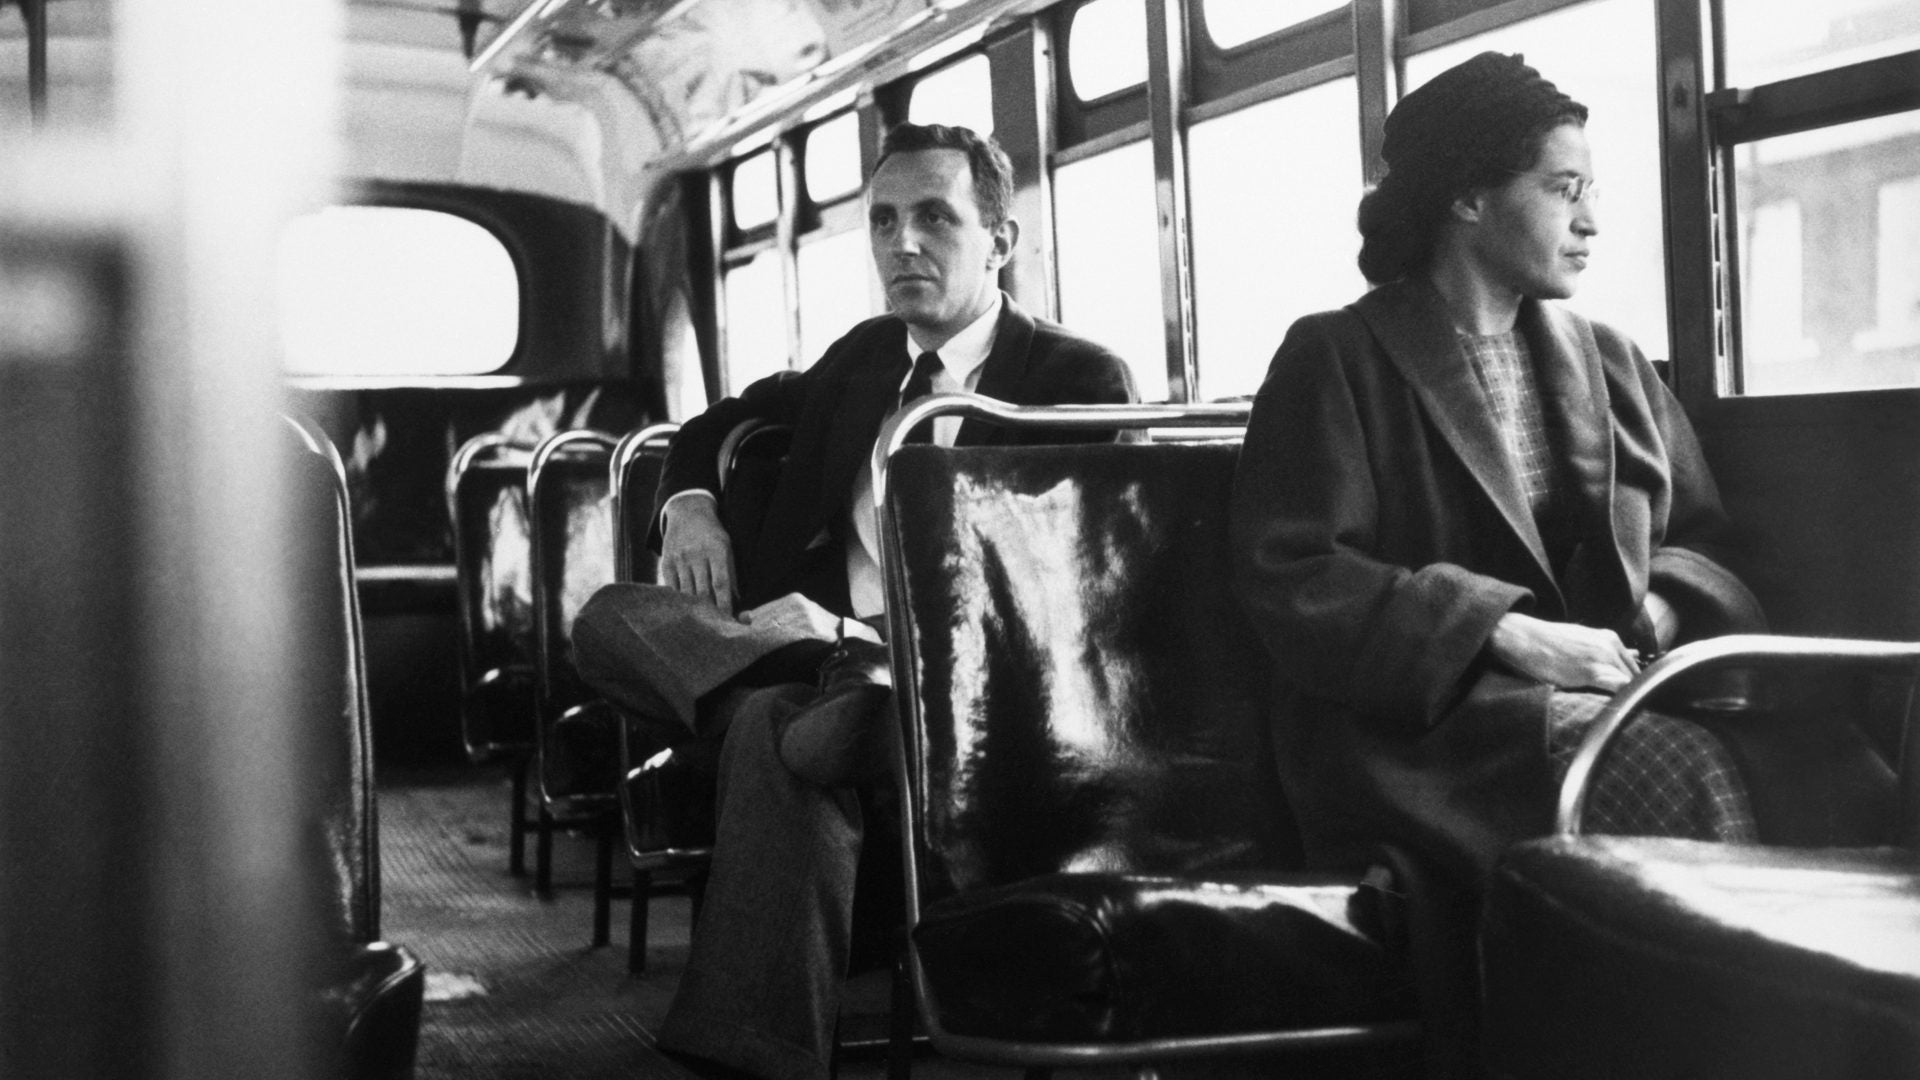 Did You Know: Rosa Parks Refused To Give Up Her Seat On This Day?